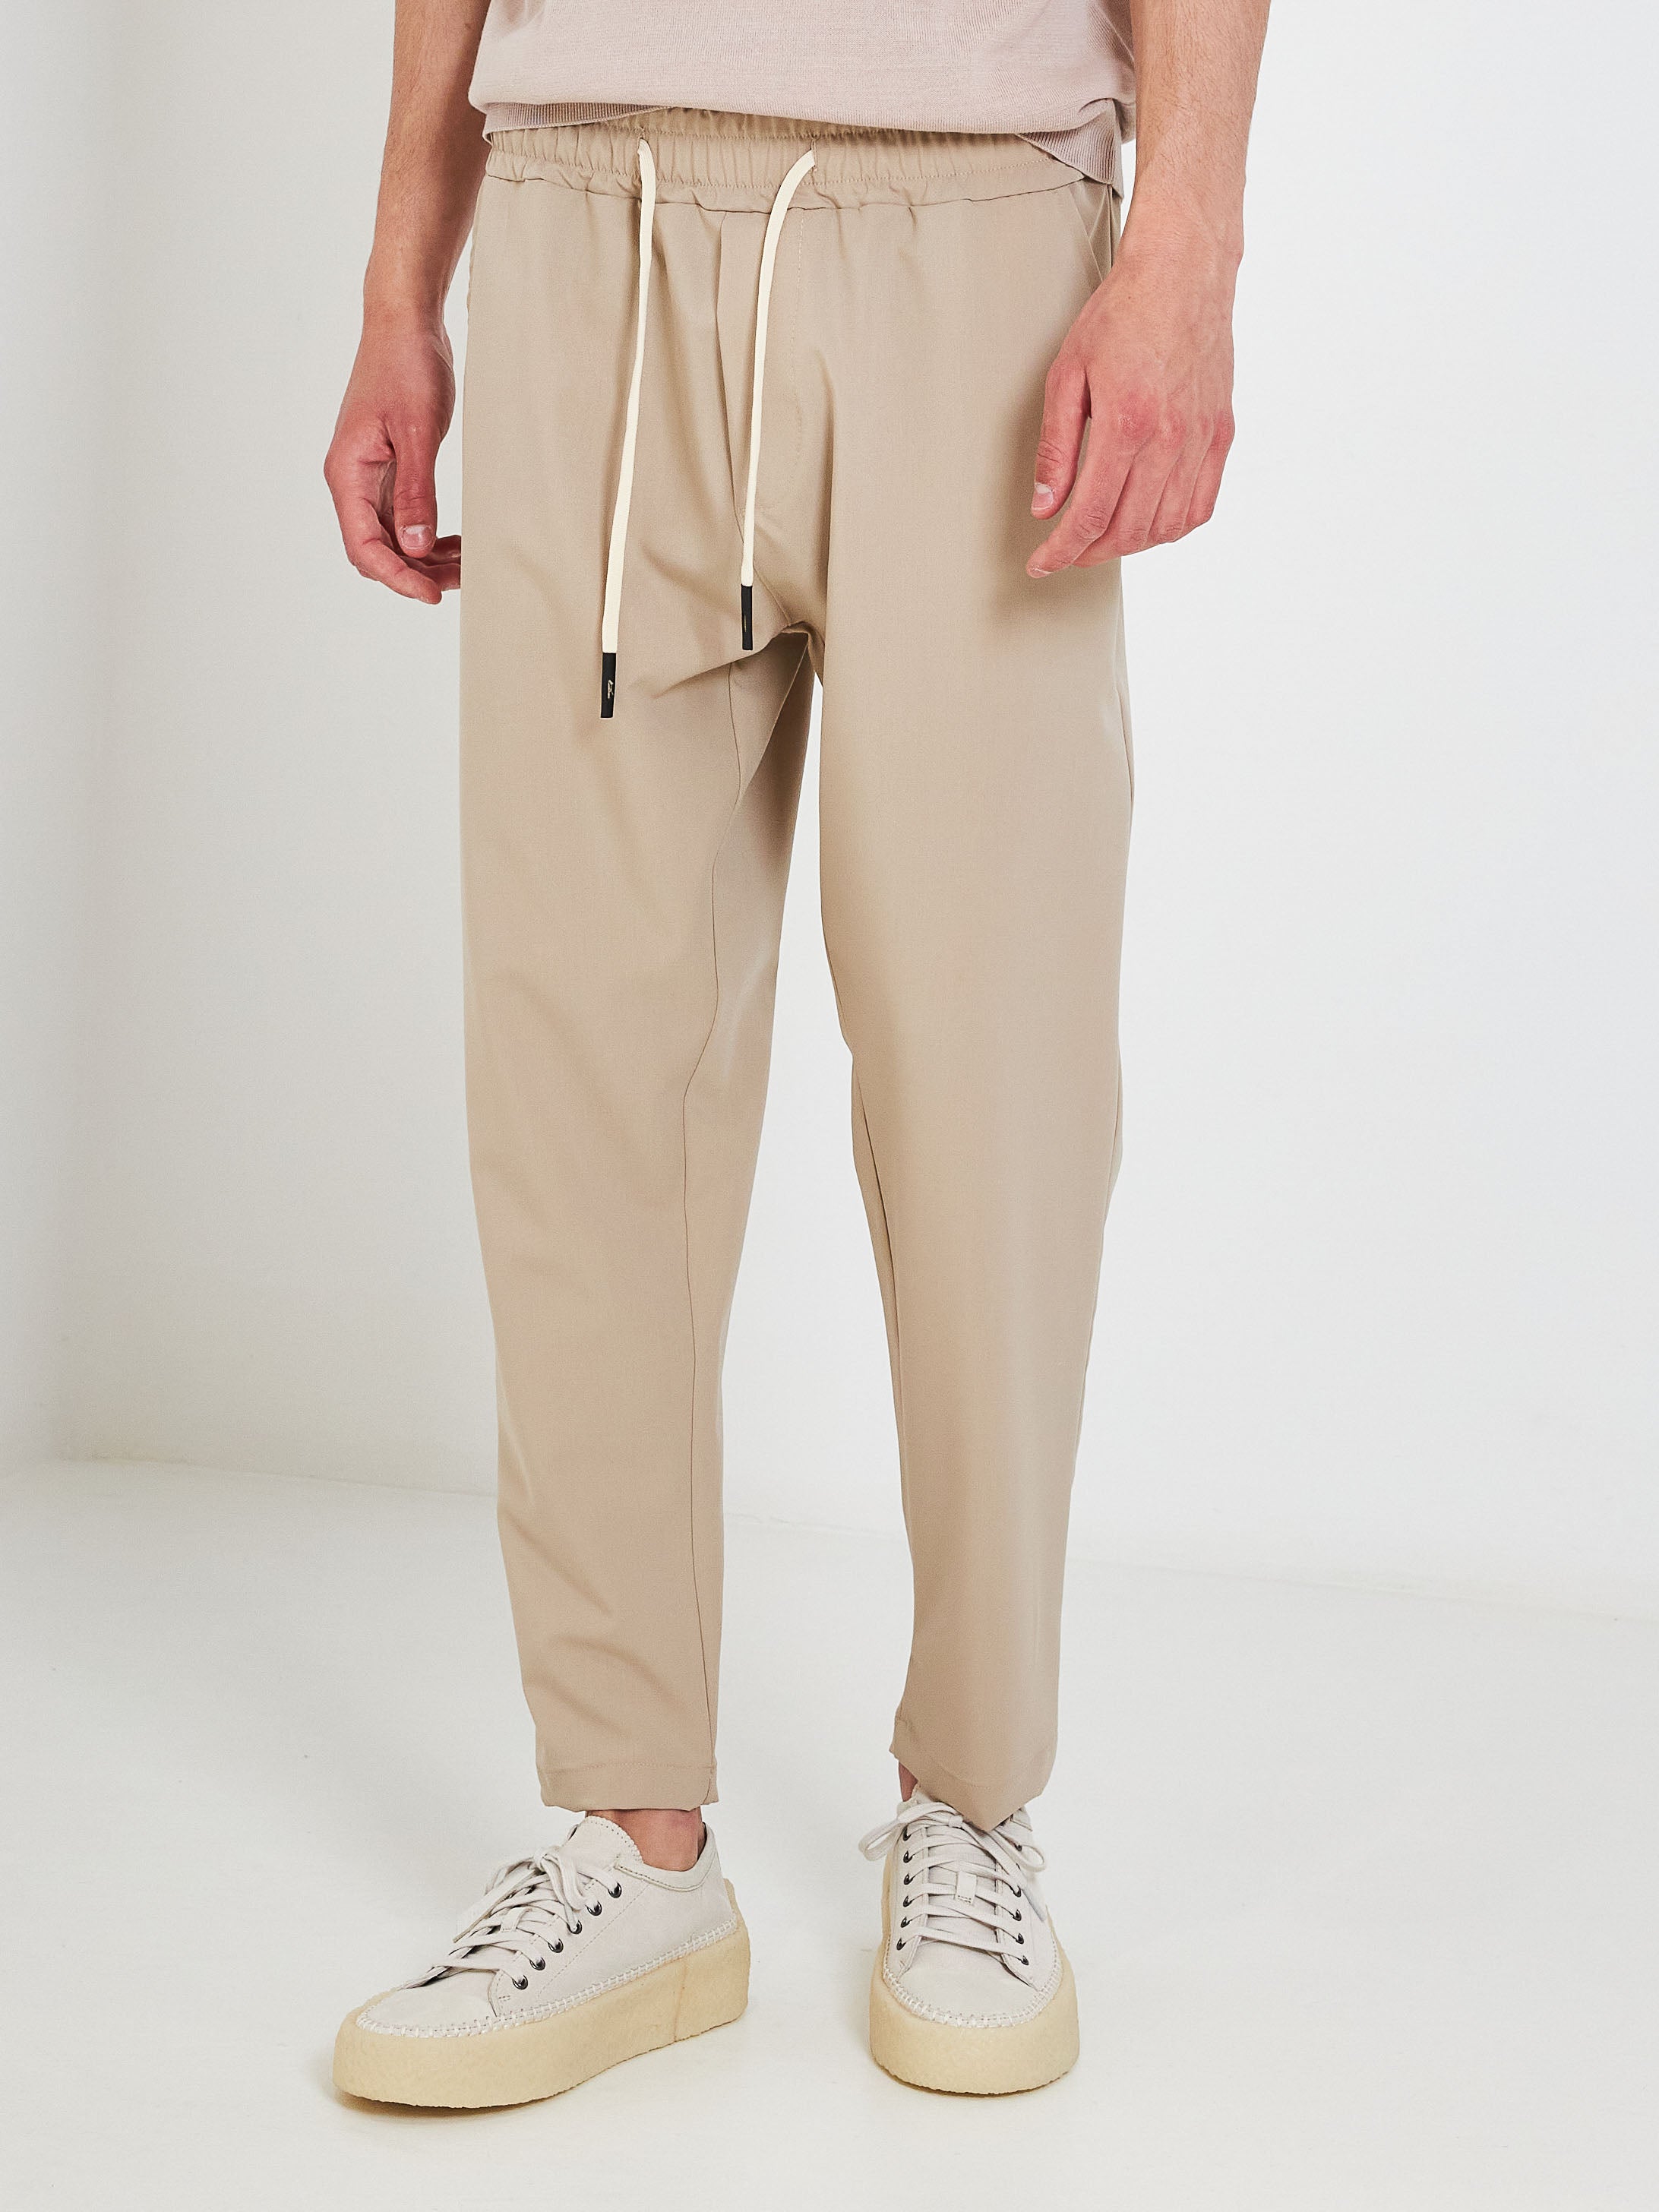 Prime beige trousers